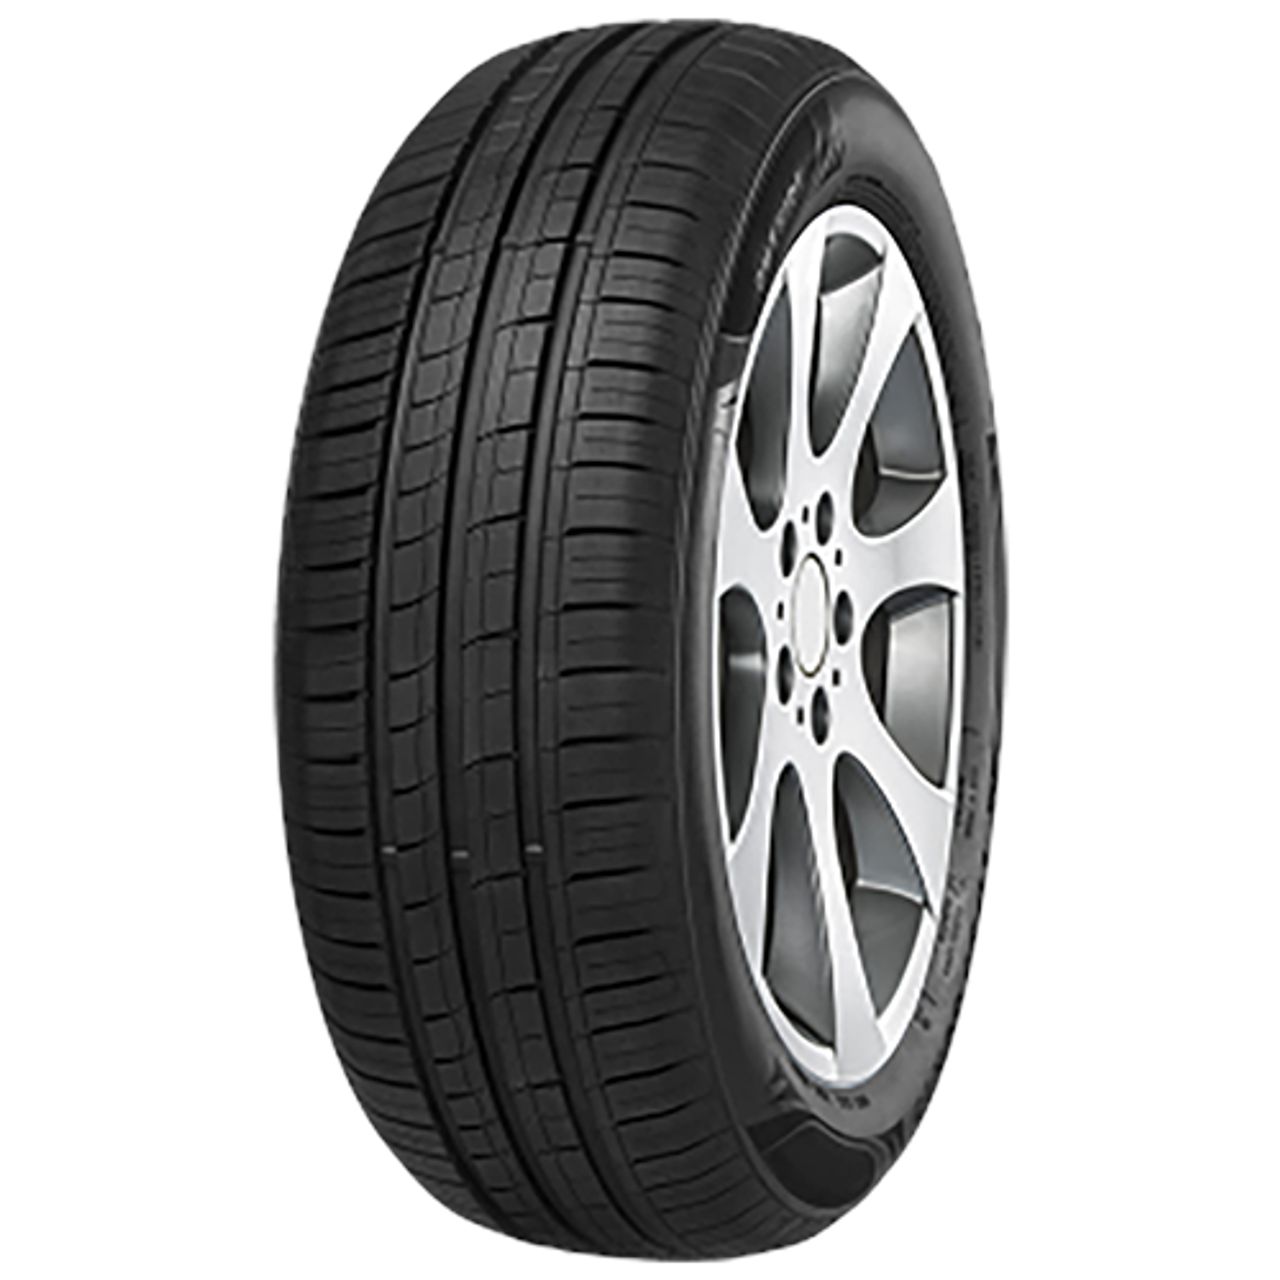 IMPERIAL ECODRIVER 4 195/70R15 97T BSW